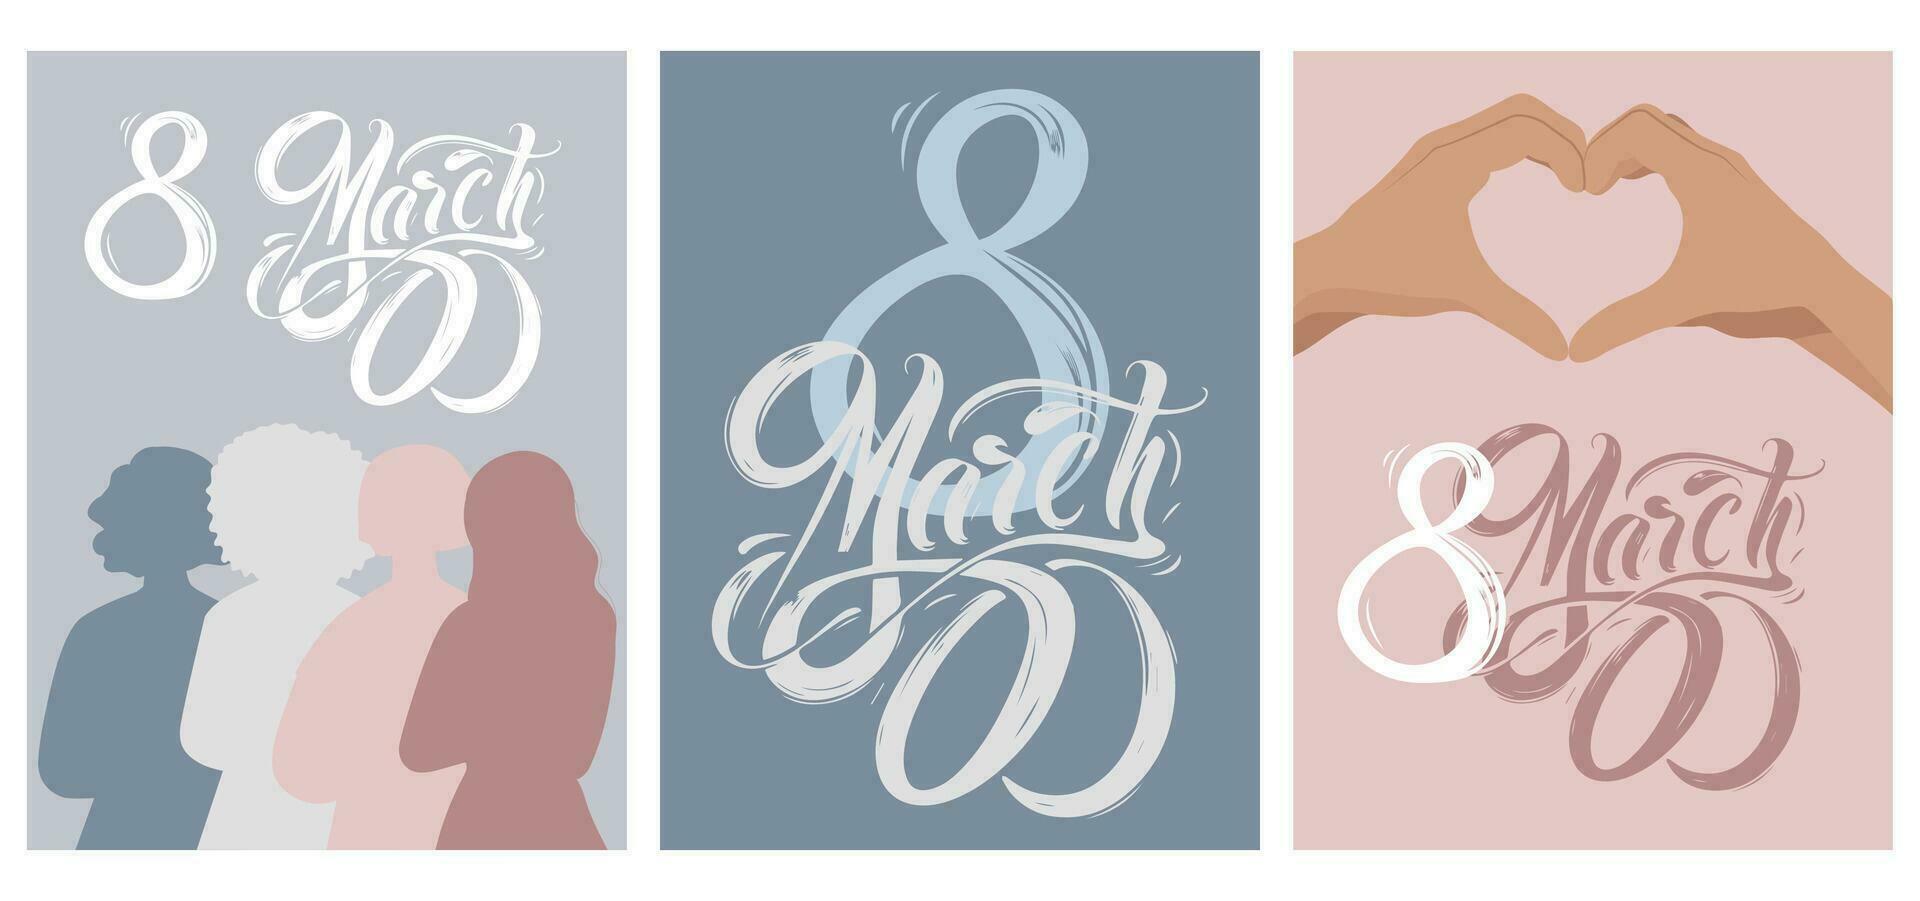 Banners, posters for International Women's Day. A cute set of stickers in pastel shades with lettering and a calligraphic inscription March 8th. vector